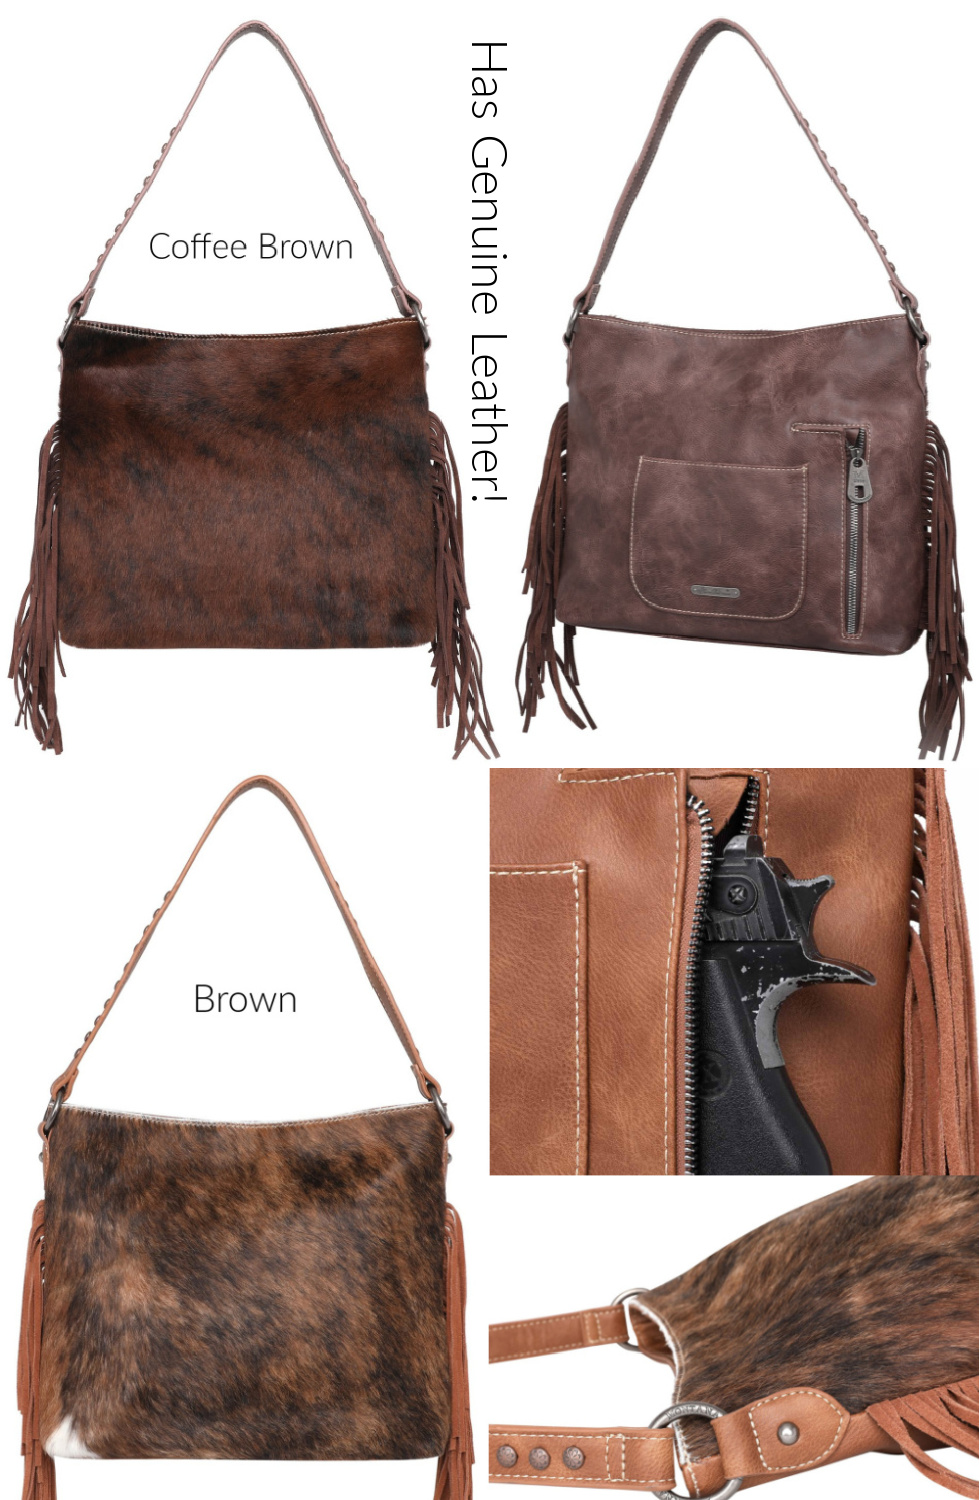 BOHEMIAN COWGIRL PURSE - Trinity Ranch Hair-On Cowhide Leather Concealed Carry Fringe Western Hobo 2 COLORS